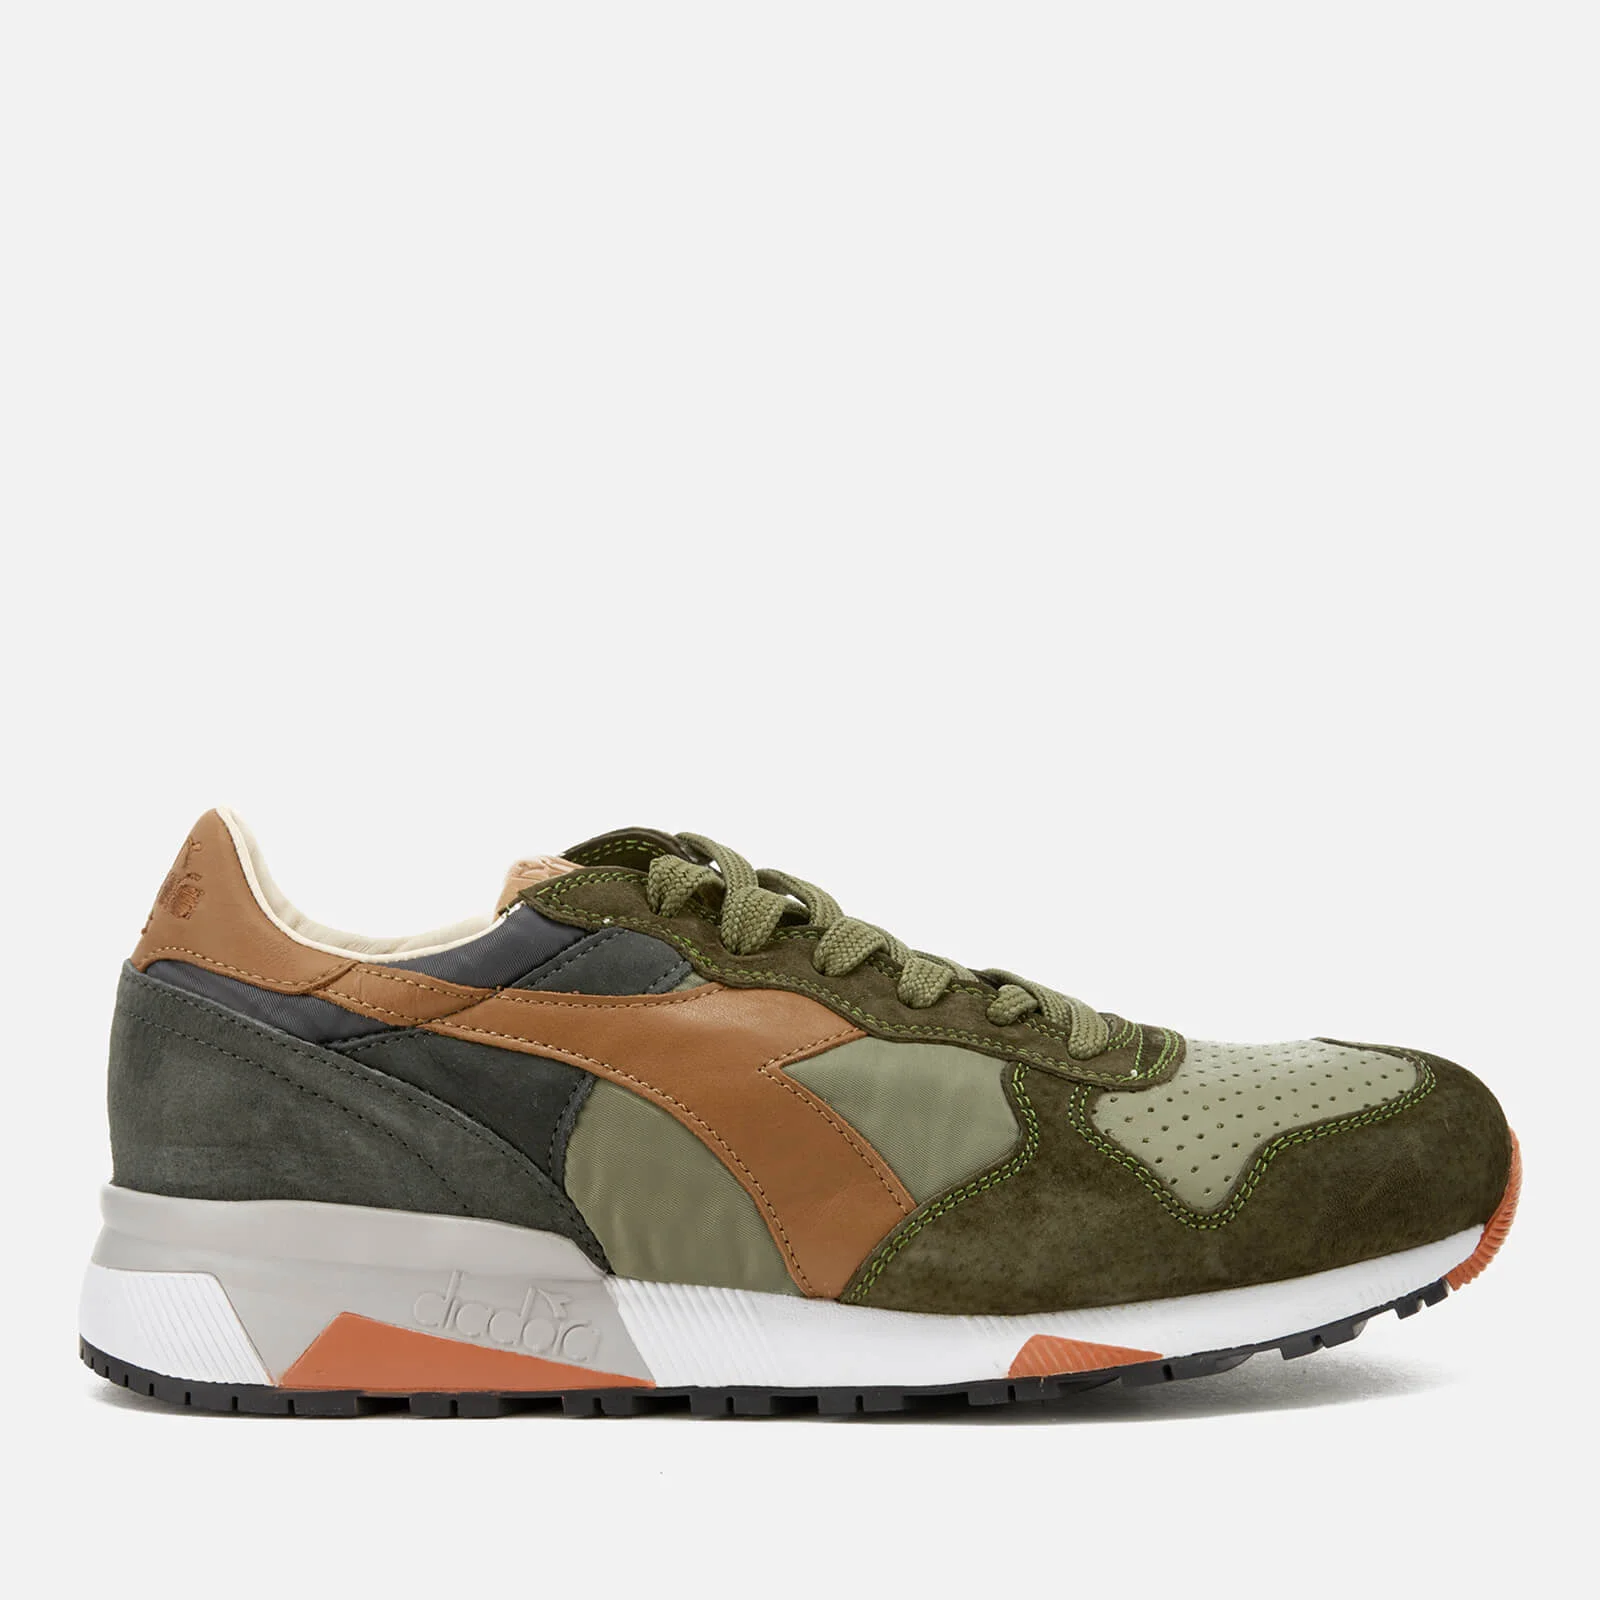 Diadora Heritage Men's Trident 90 Nyl Leather/Perforated Runner Trainers - Burnt Olive/Phantom Image 1